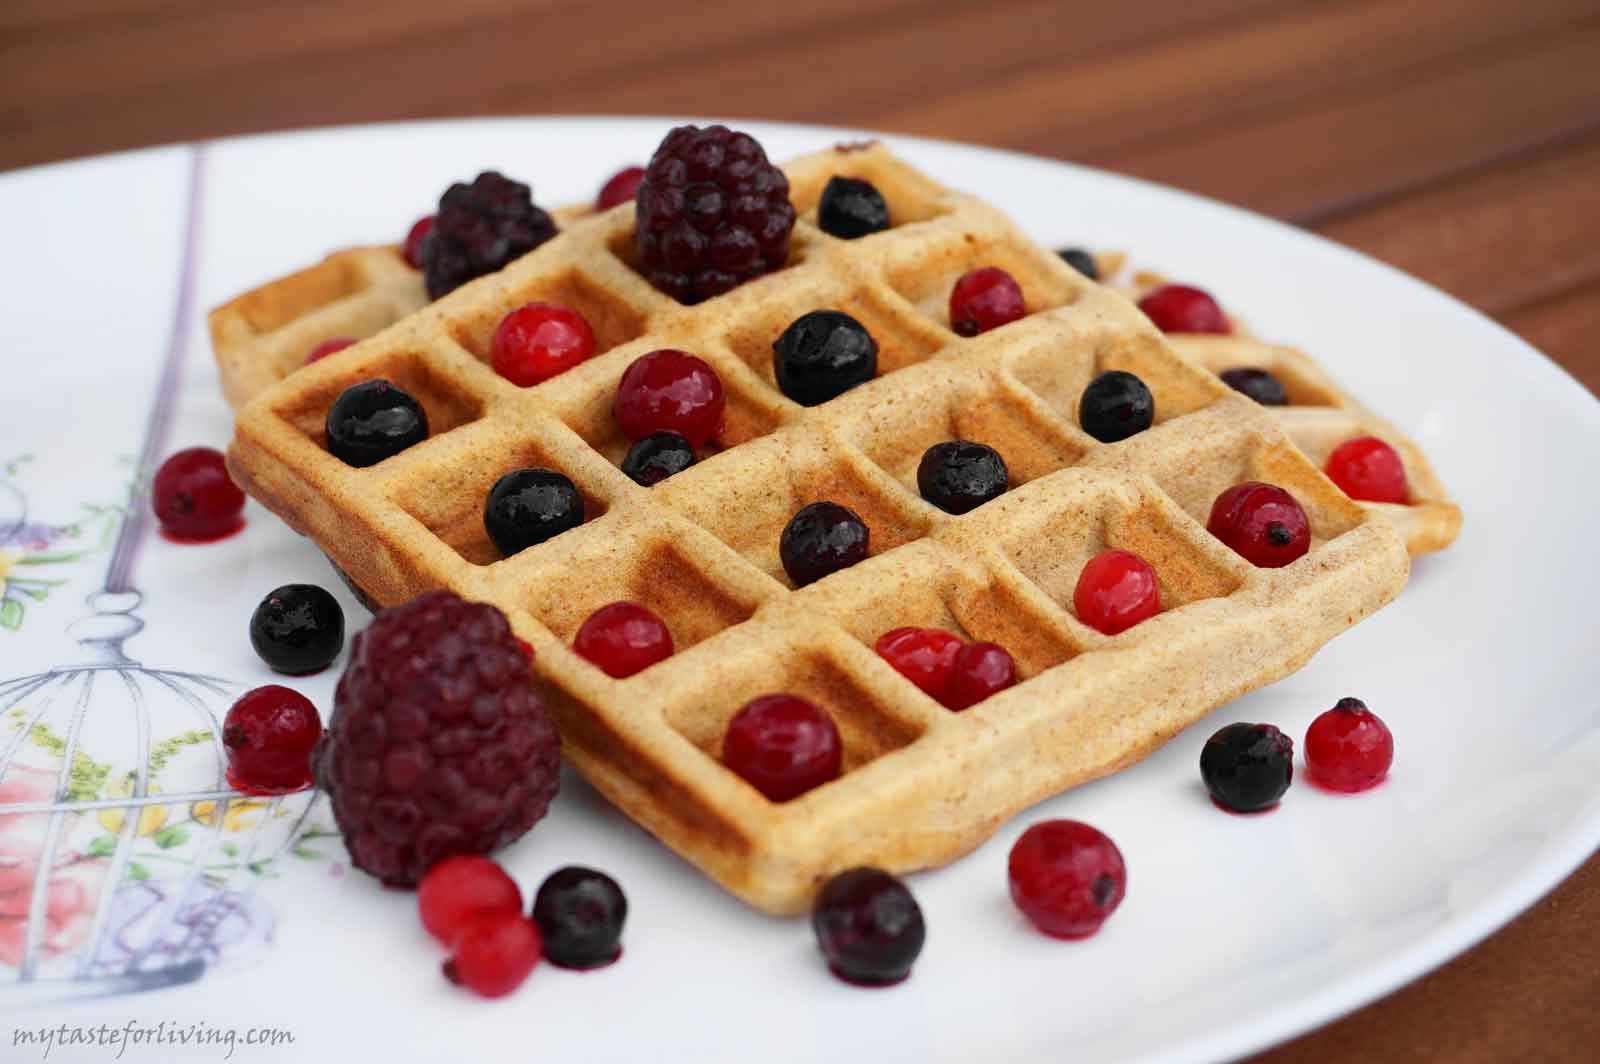 I offer you a recipe for waffles with whole wheat flour, which are very appetizing and delicious, and can be prepared very quickly.